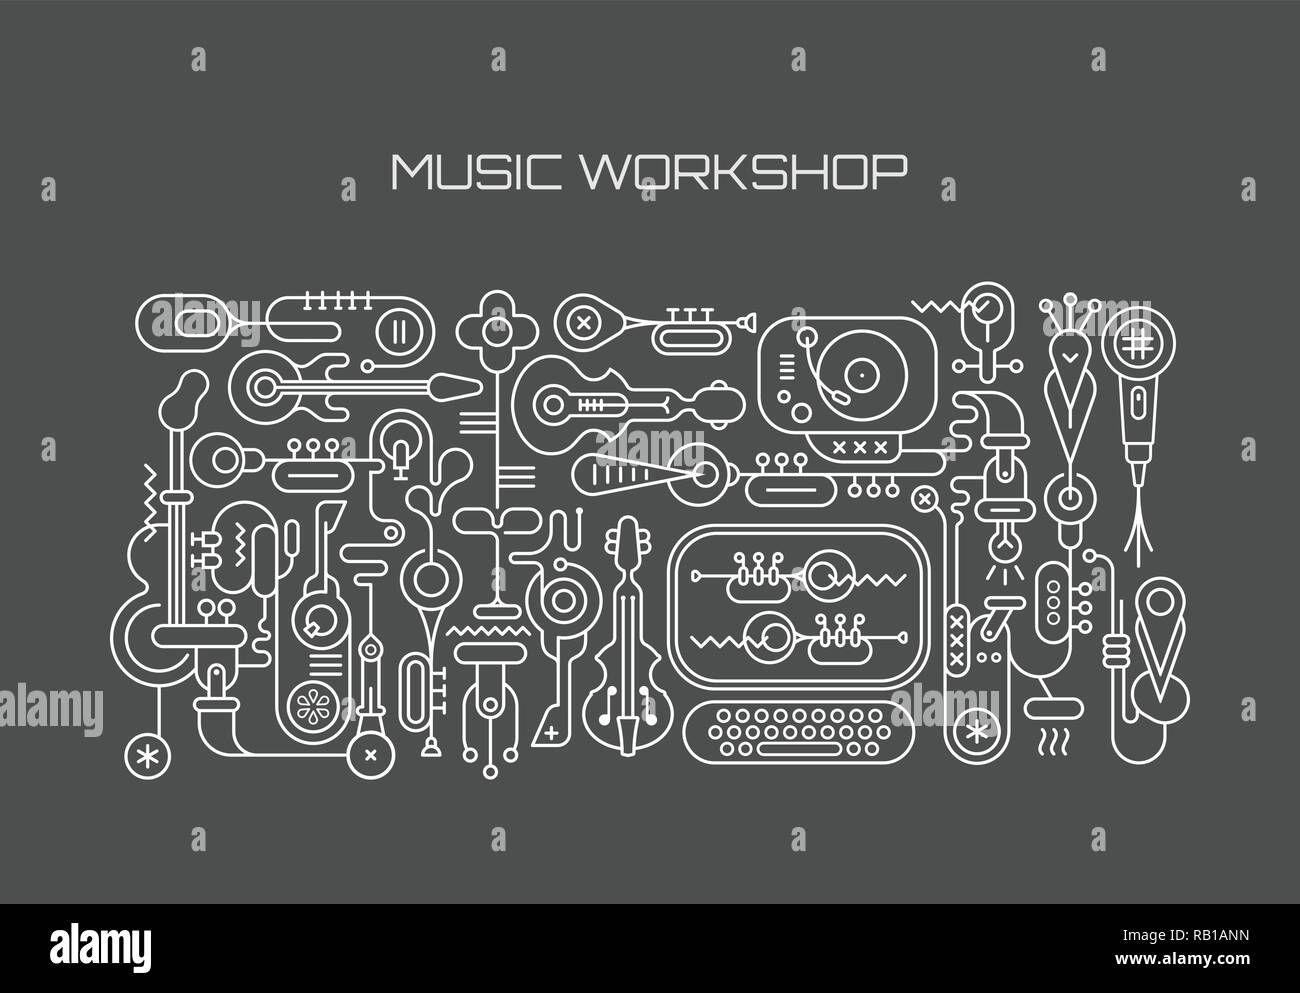 Music Workshop abstract art vector illustration. White line art image isolated on a dark grey background. Stock Vector